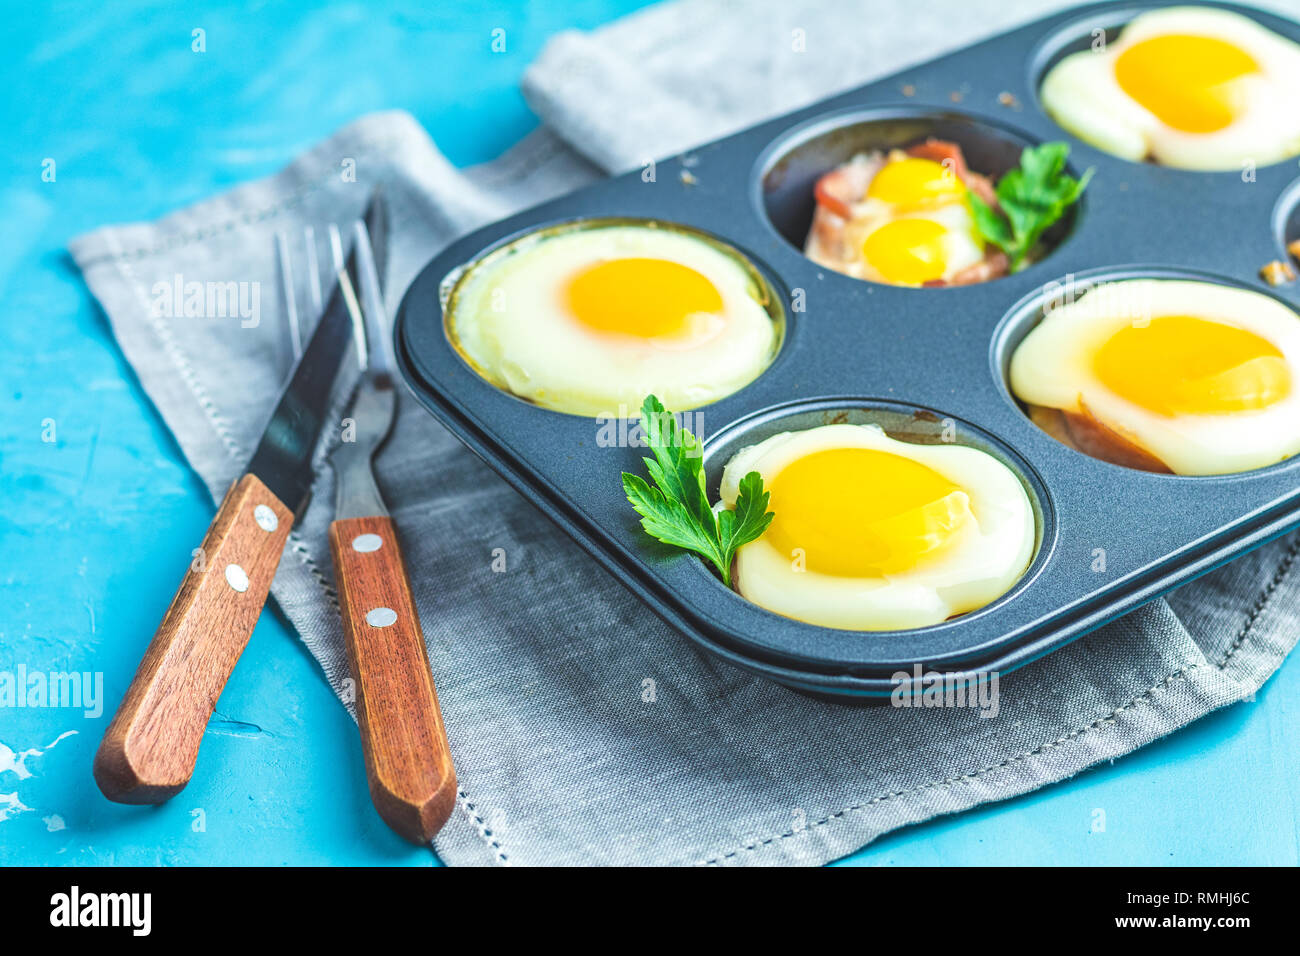 Baked eggs in baking molds. Portioned casserole from bacon